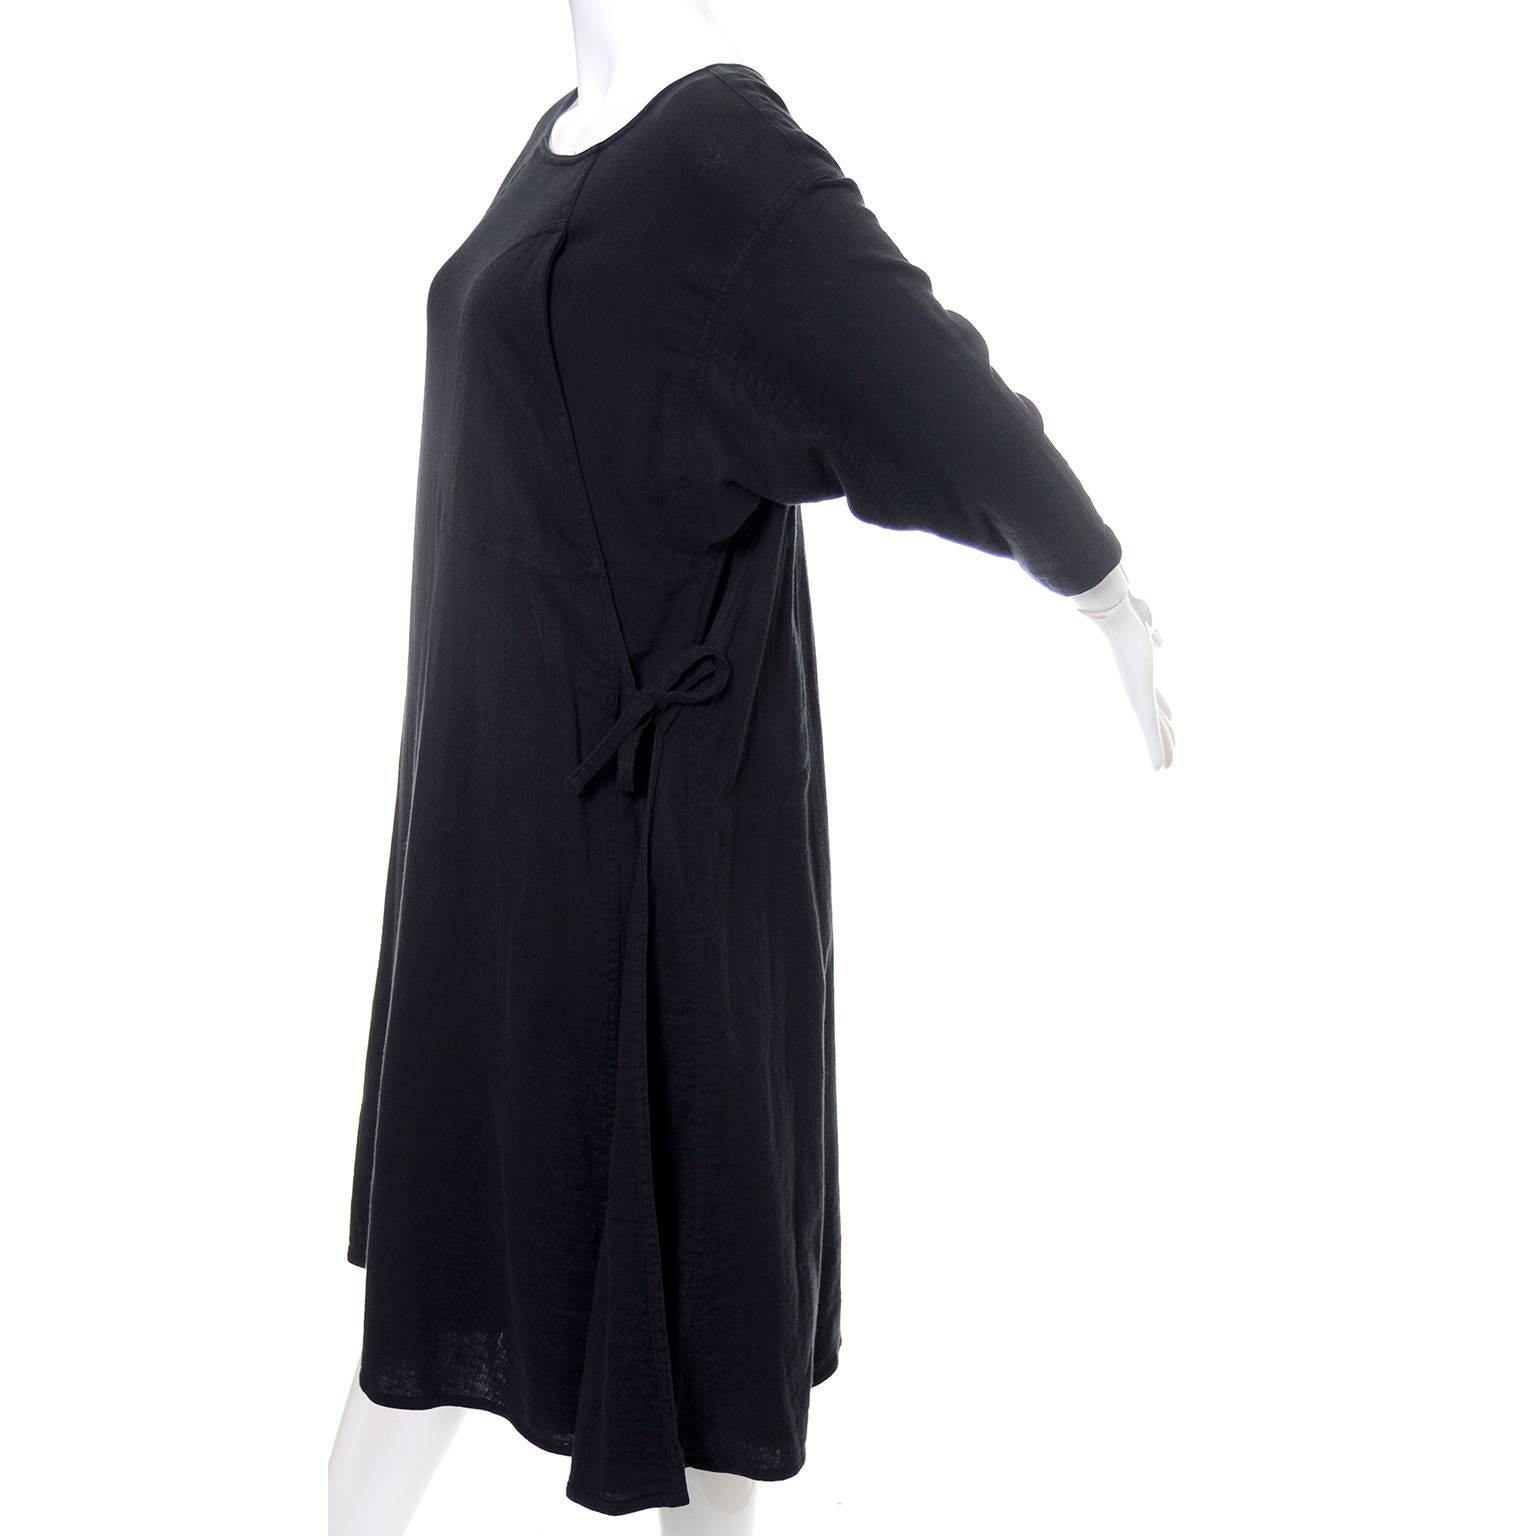 Black Issey Miyake Sport 1980s Cotton Dress or Tunic Made in Japan Minimalist Chic